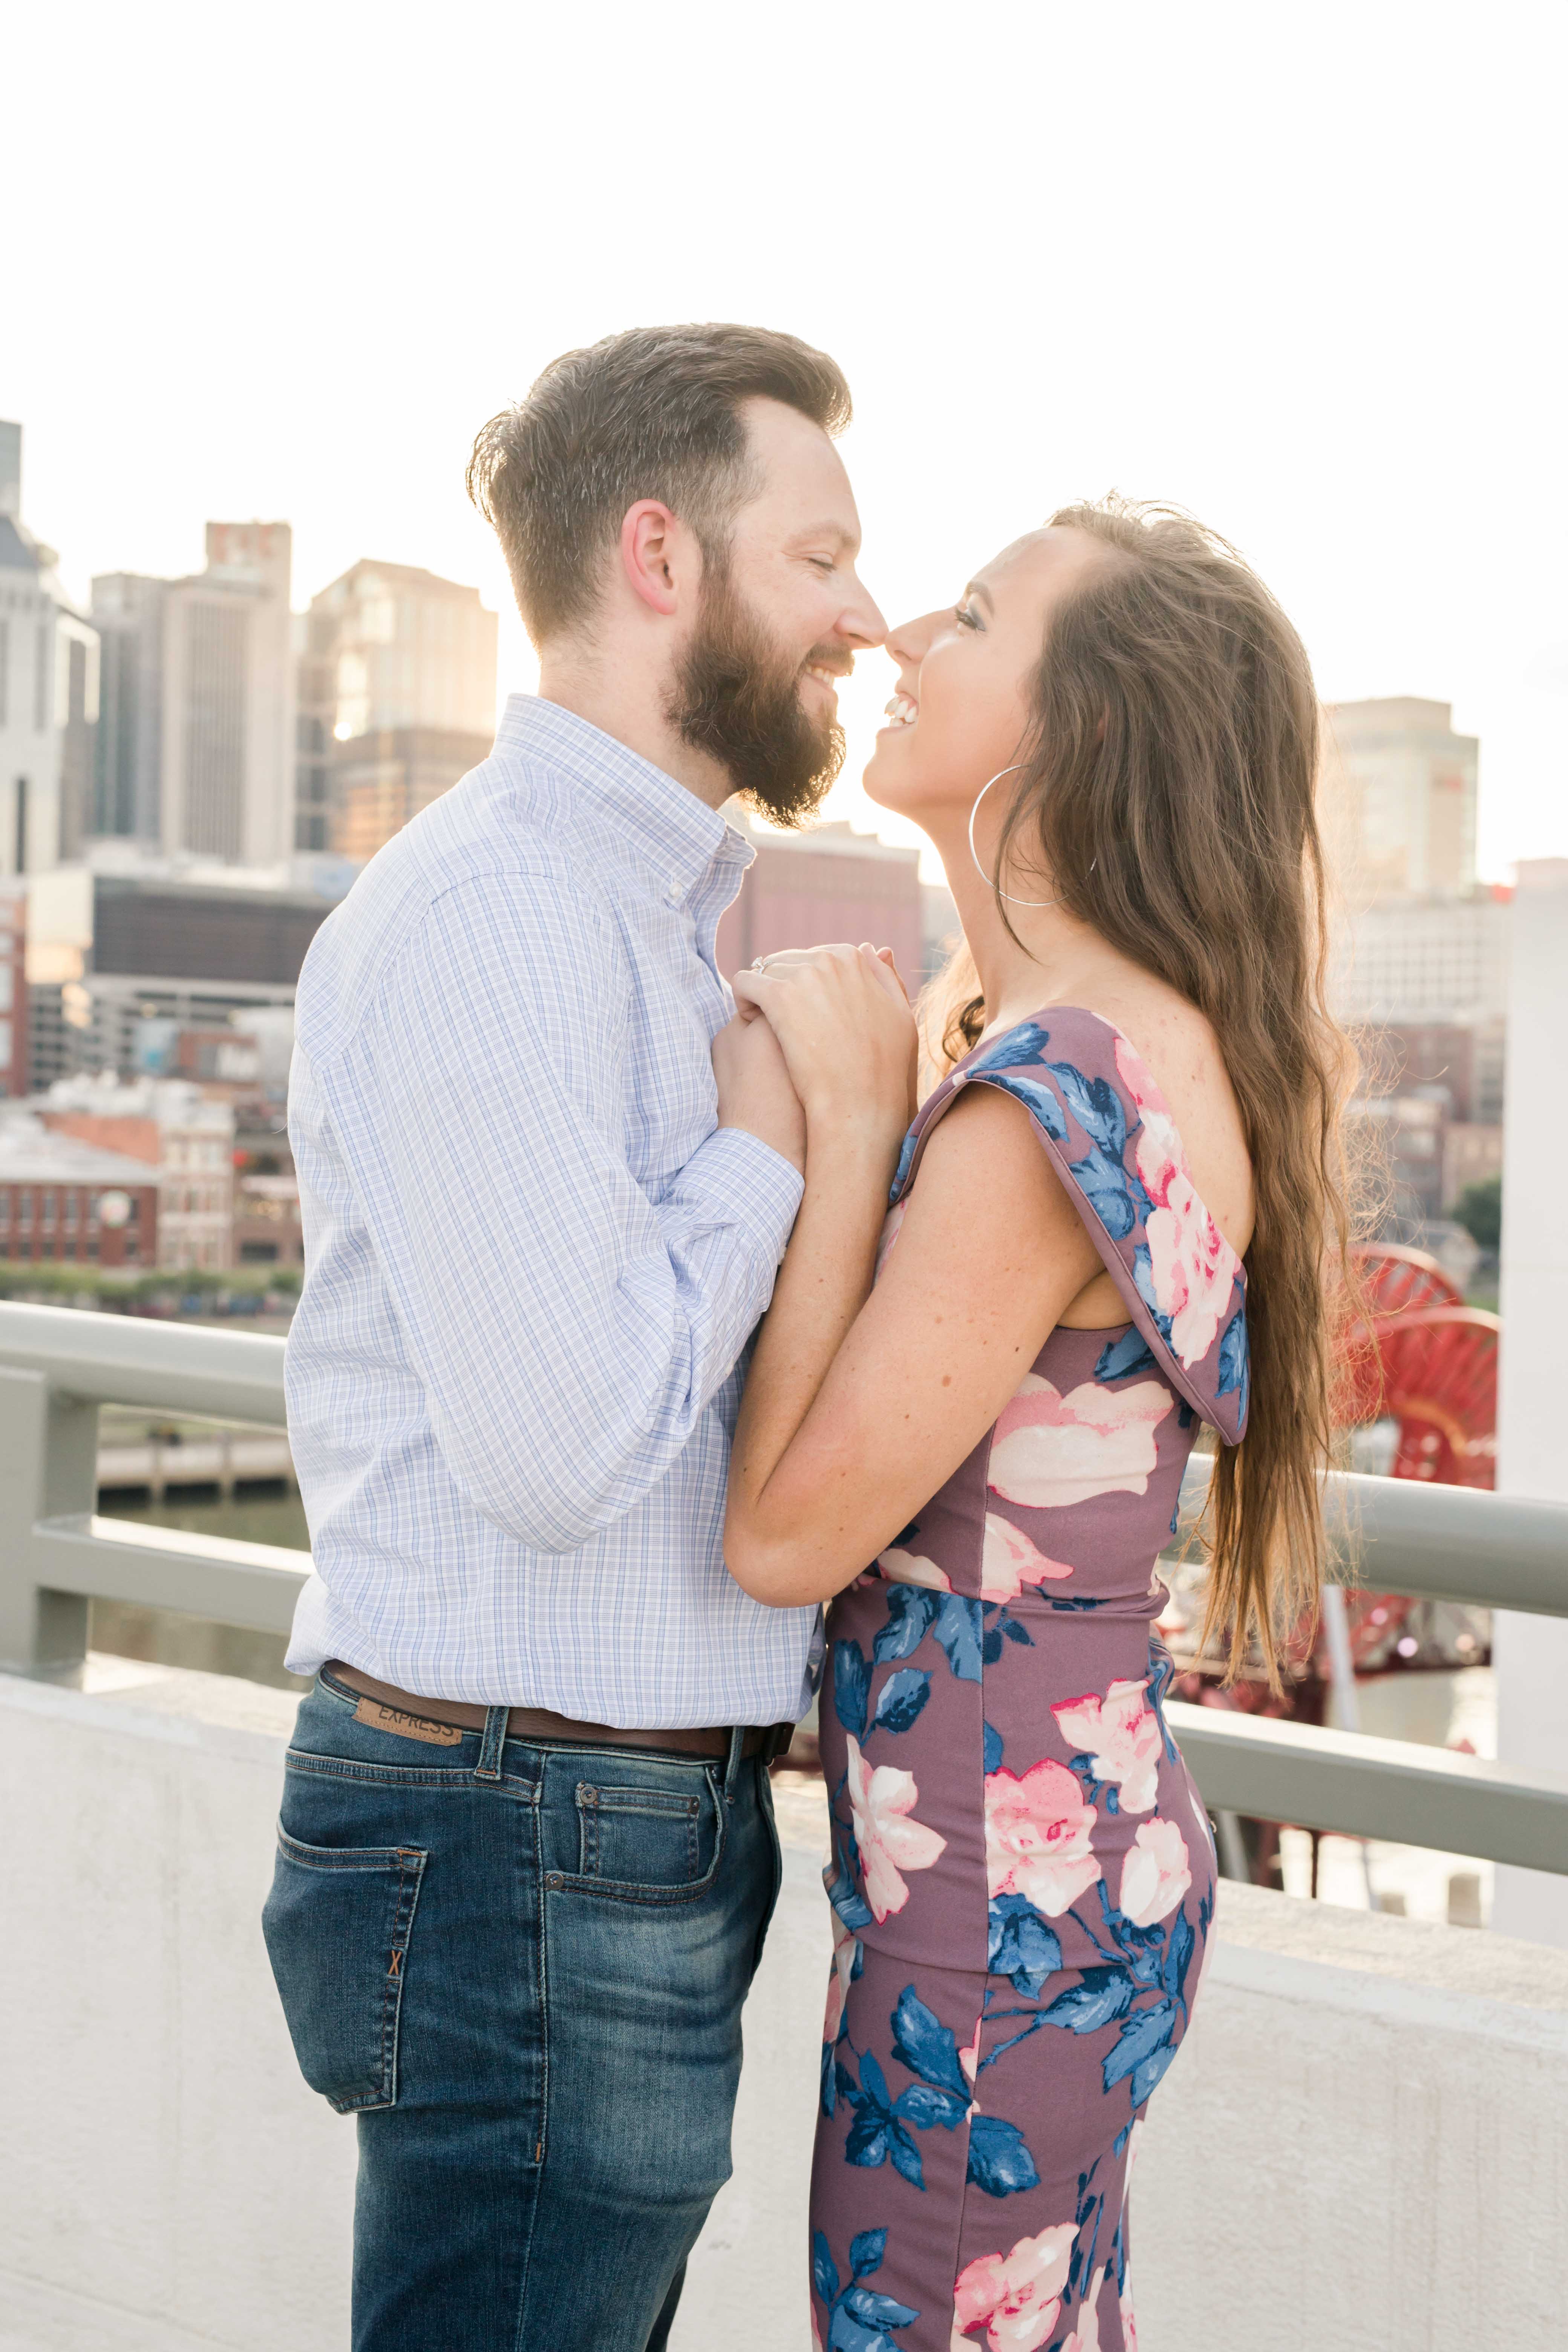 guy in button down and girl in purple dress nuzzling noses